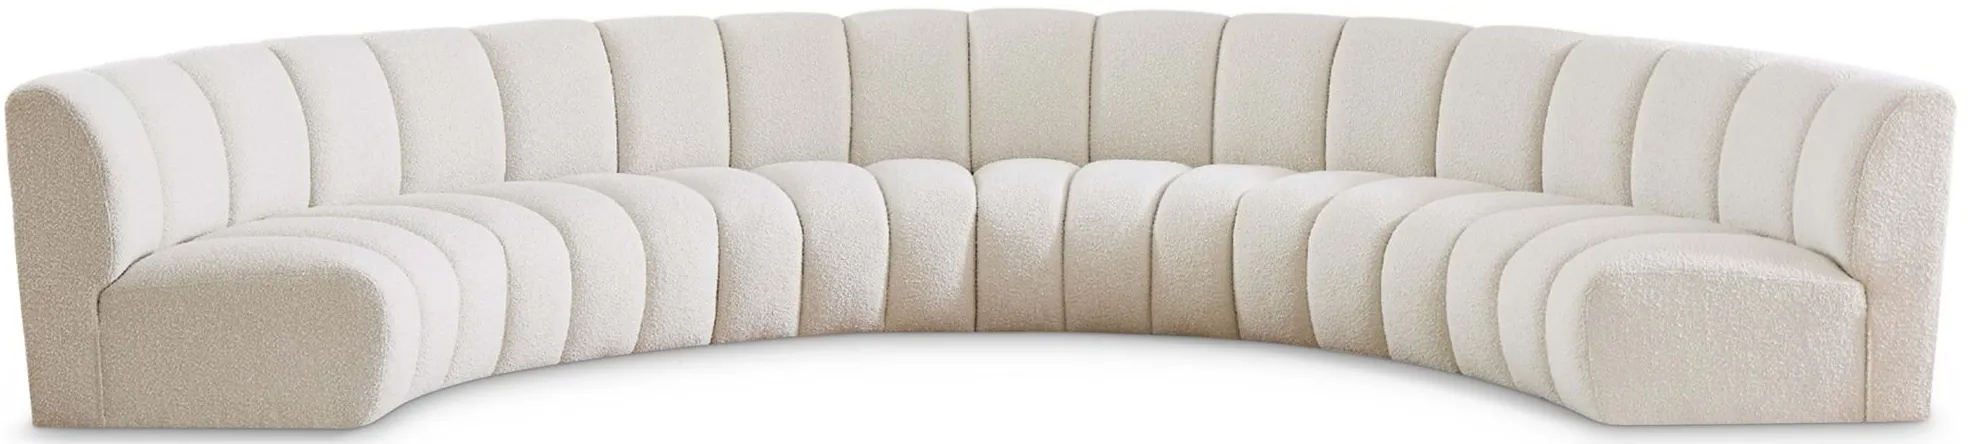 Infinity 6pc. Modular Sectional in Cream by Meridian Furniture